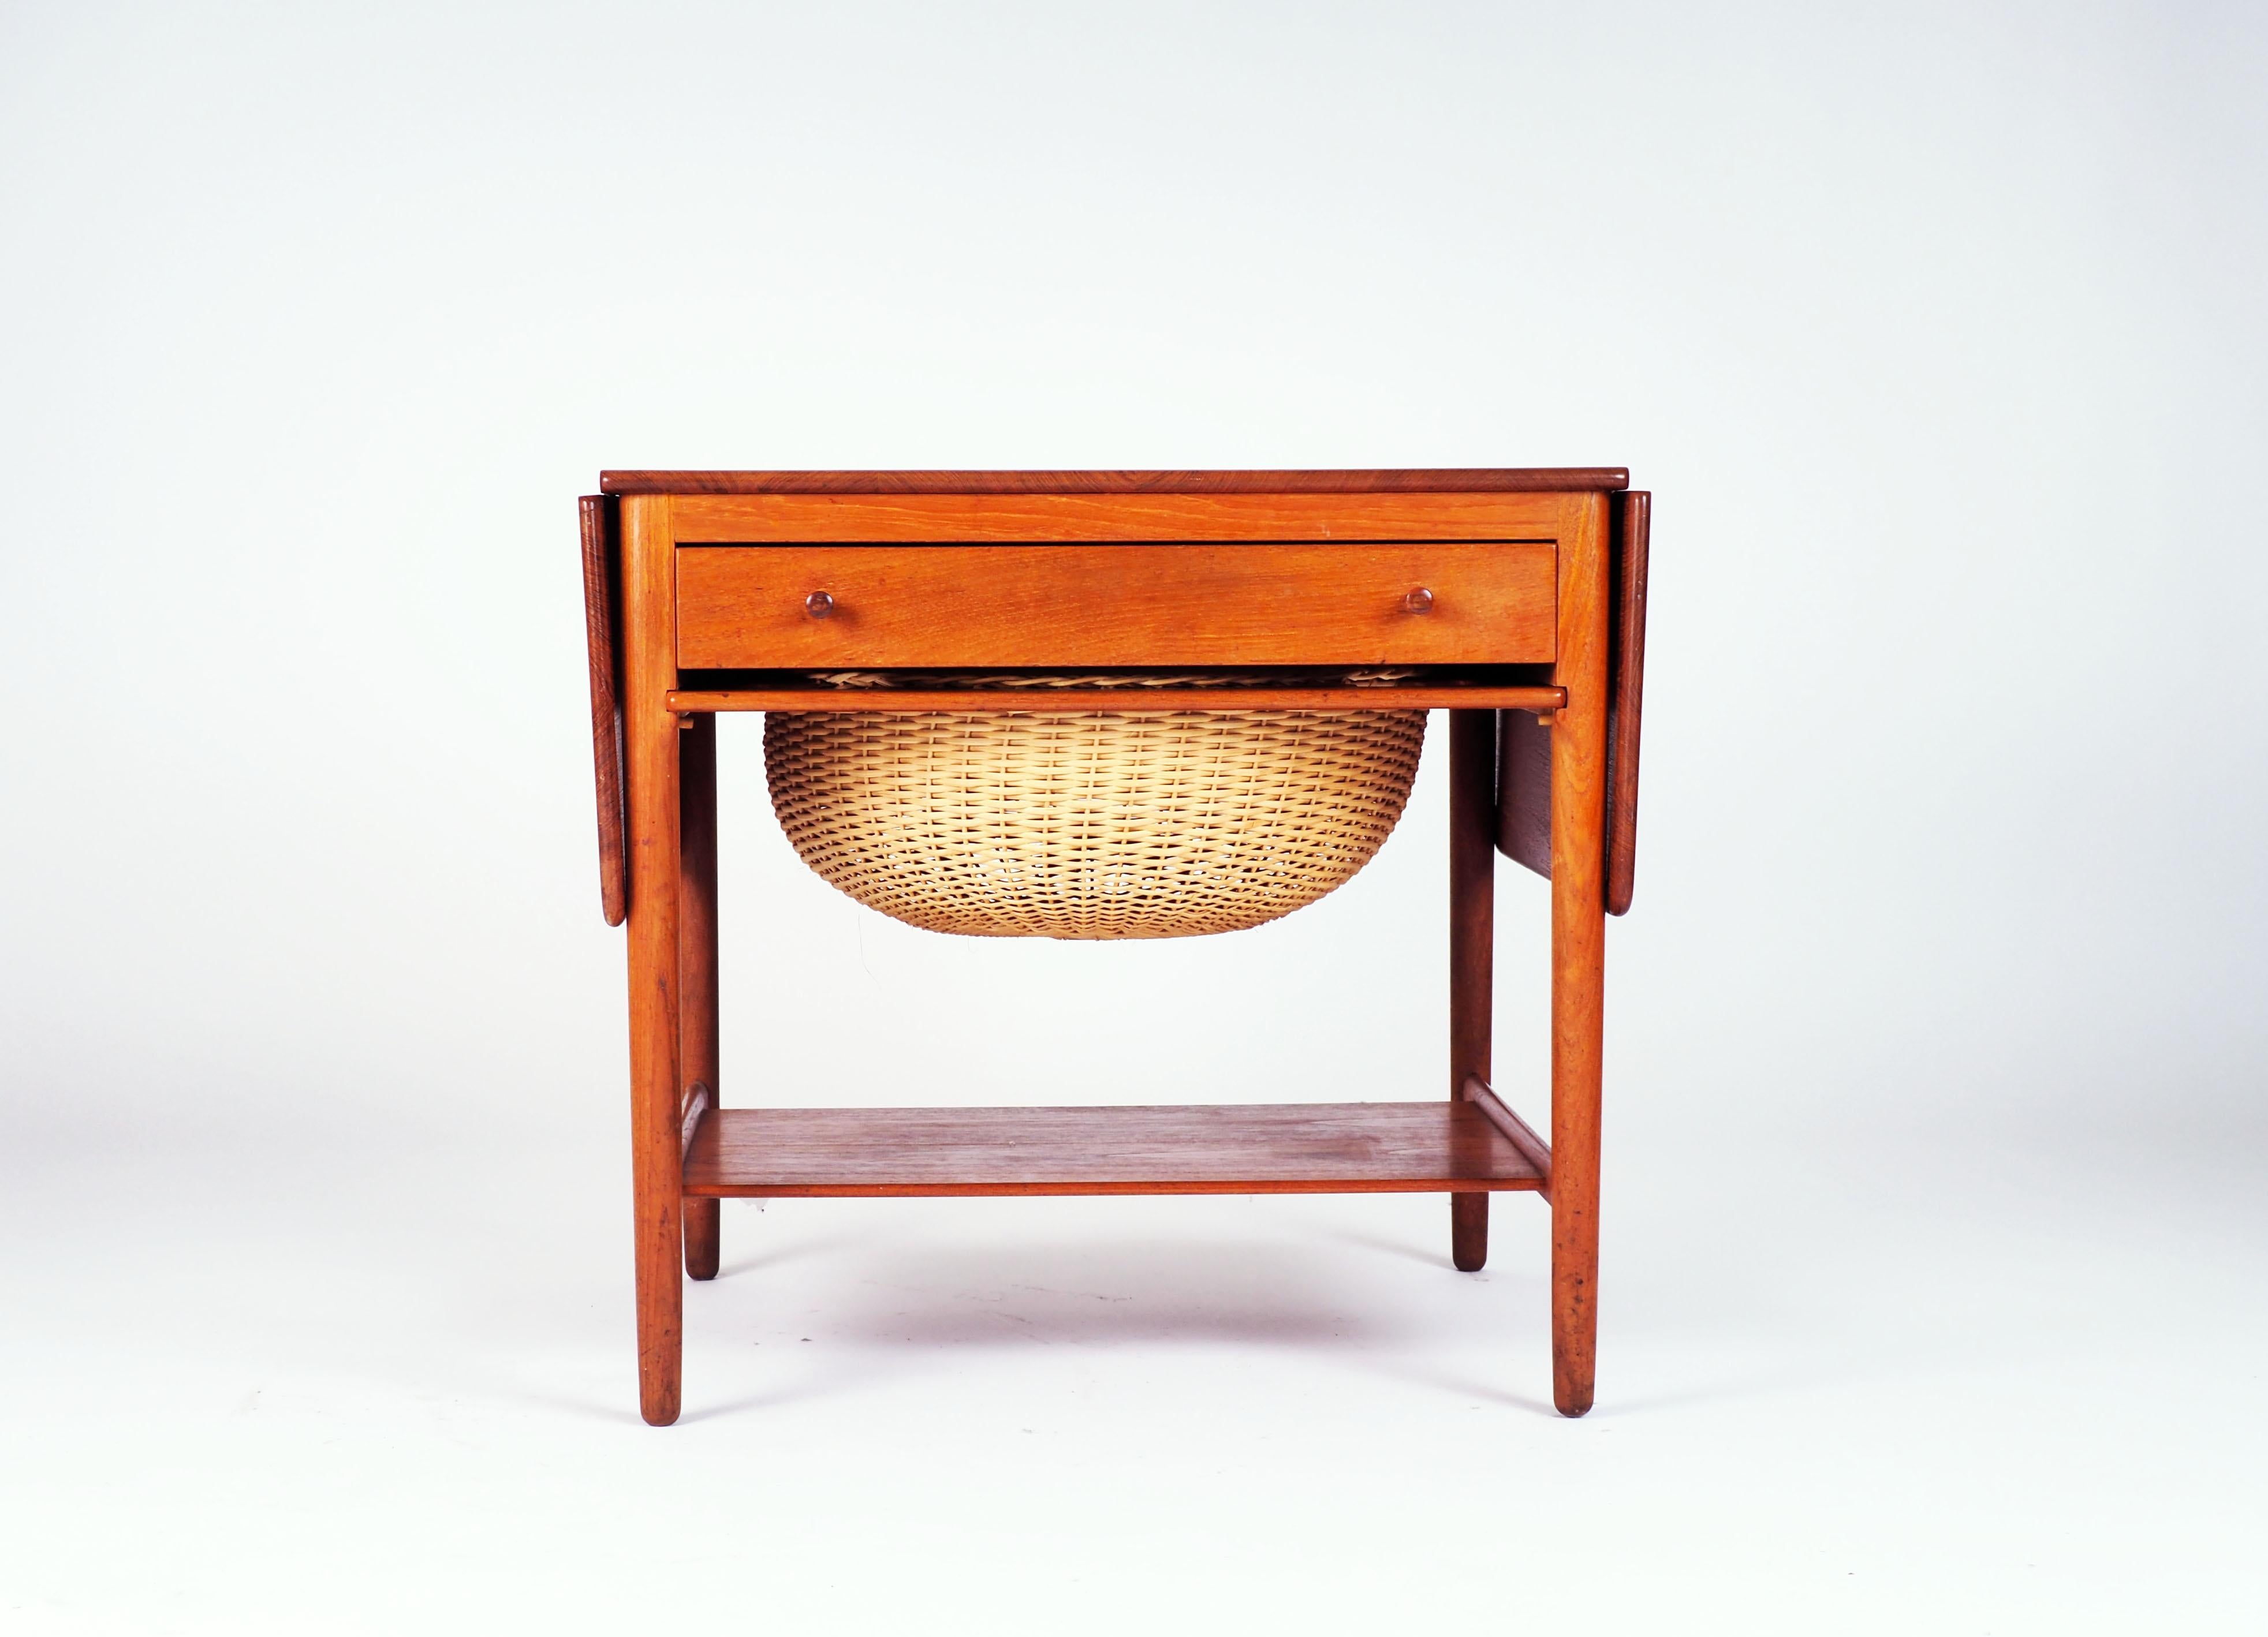 Rattan Sewing table AT-33 by Hans J Wegner made by Andreas Tuck, Denmark